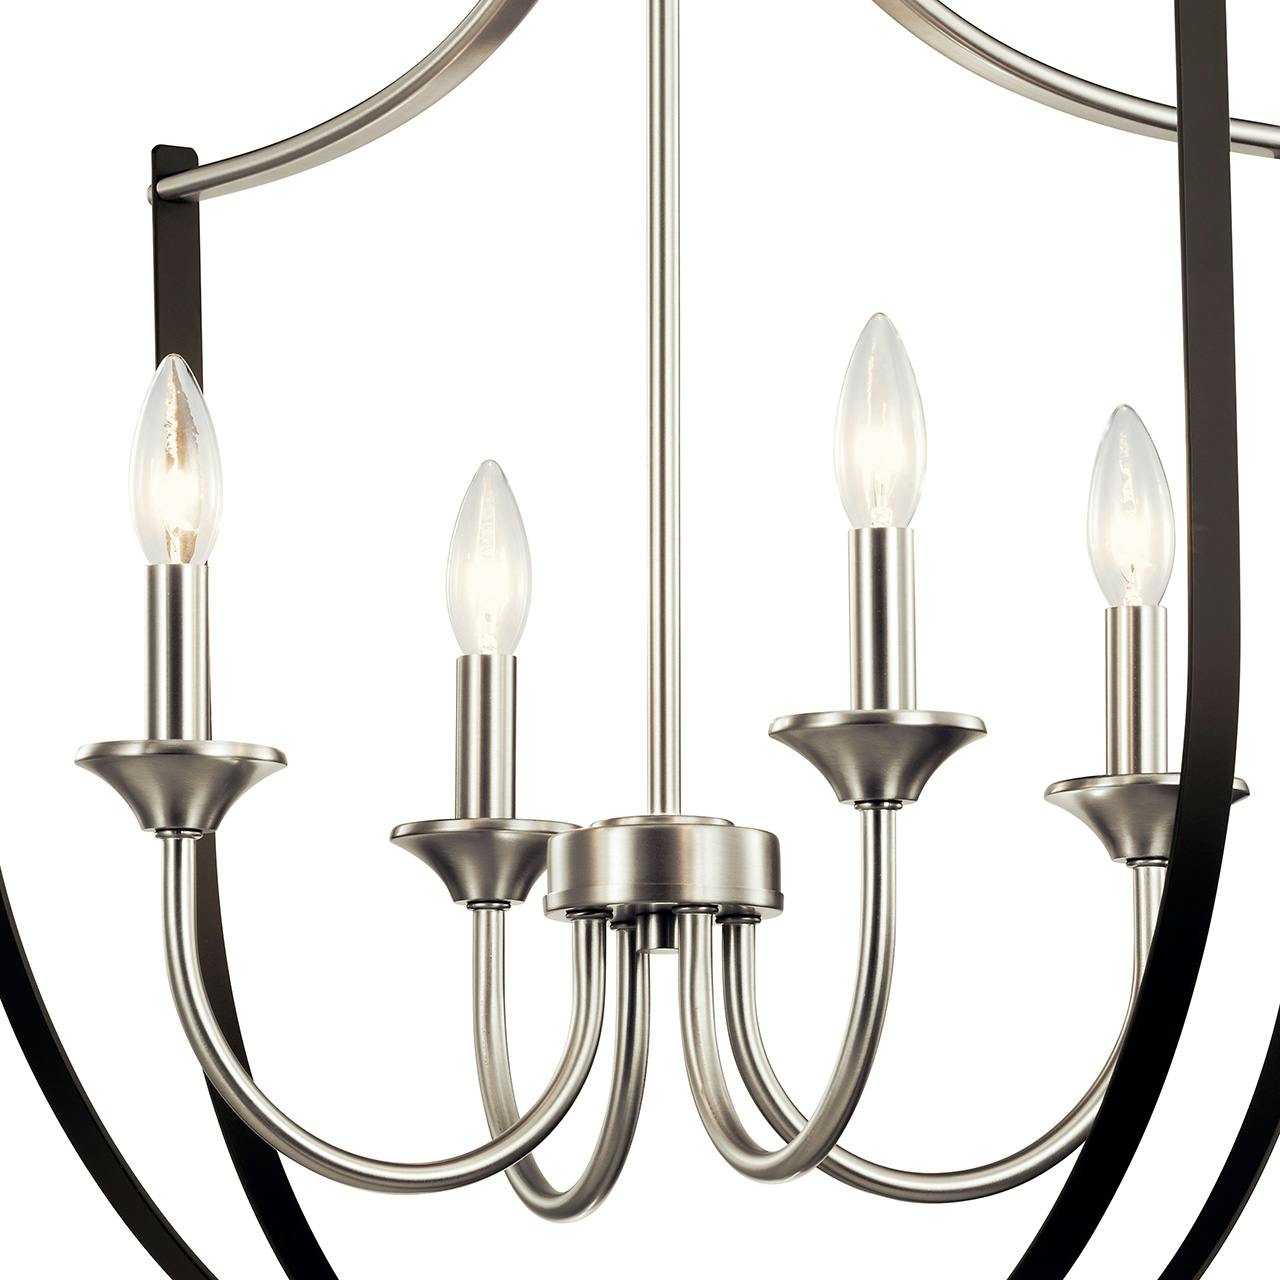 Close up view of the Tula 4 Light Foyer Chandelier Nickel on a white background